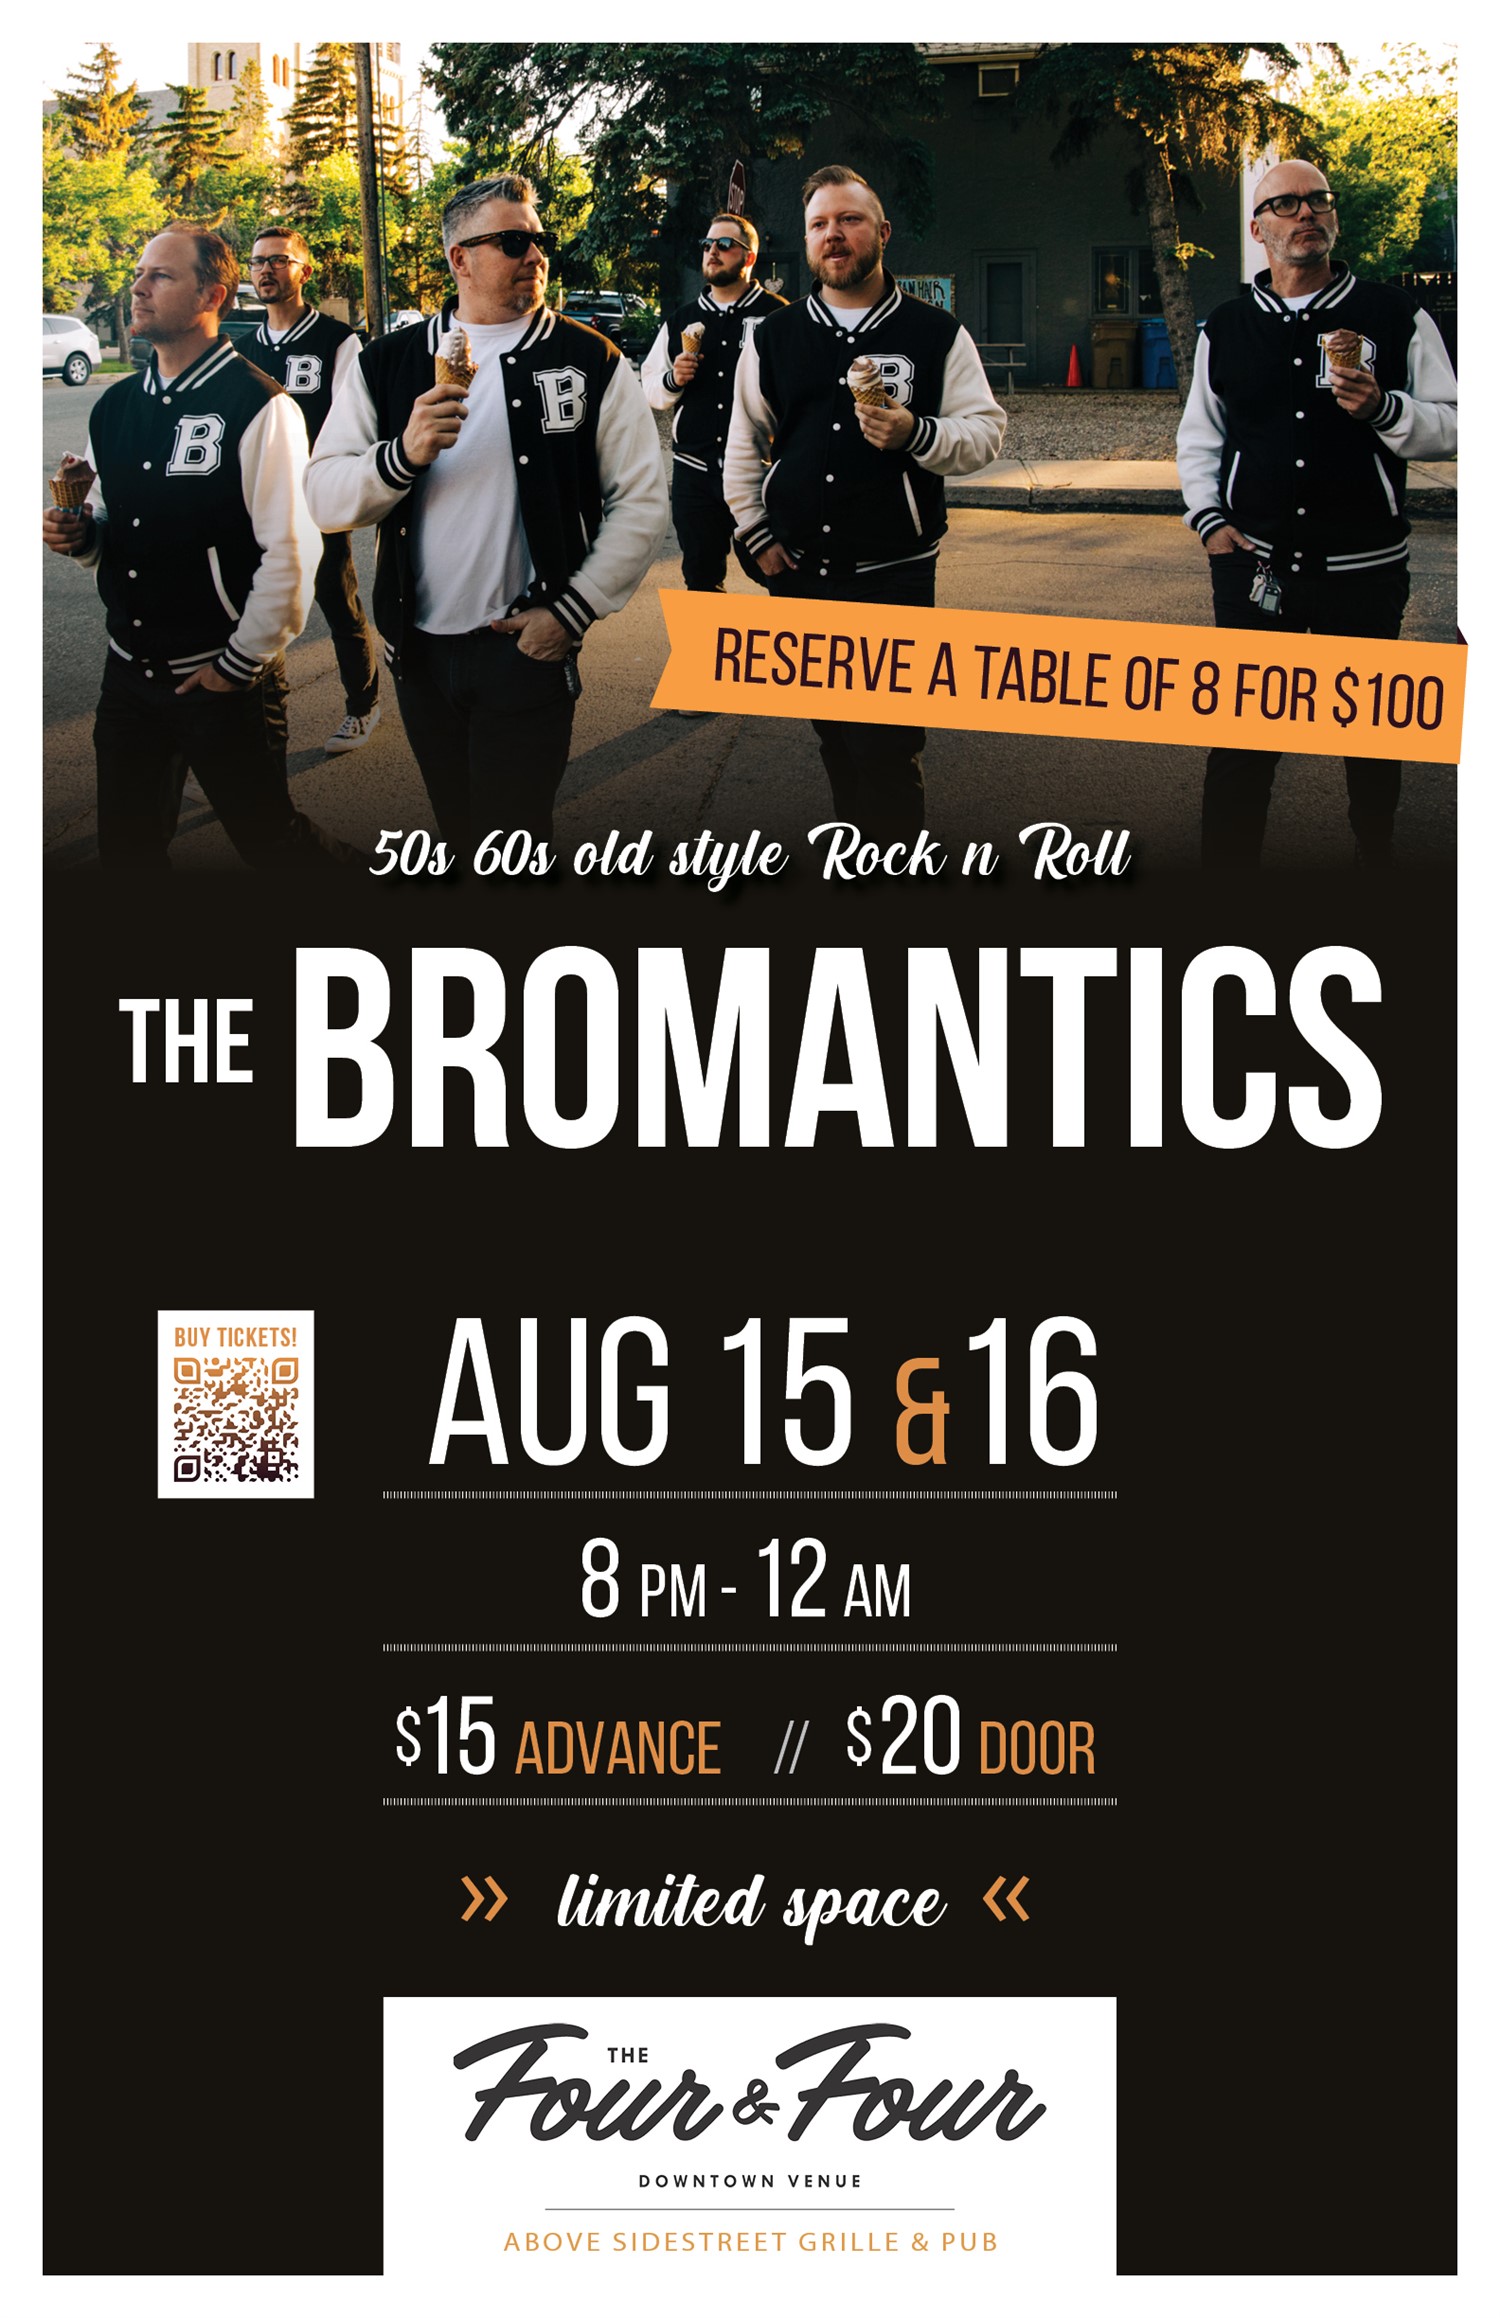 The Bromantics Aug. 16, 2024 on Aug 16, 20:00@The Four and Four, above Sidestreet Grille & Bar - Buy tickets and Get information on Sidestreet Live / Four and Four 